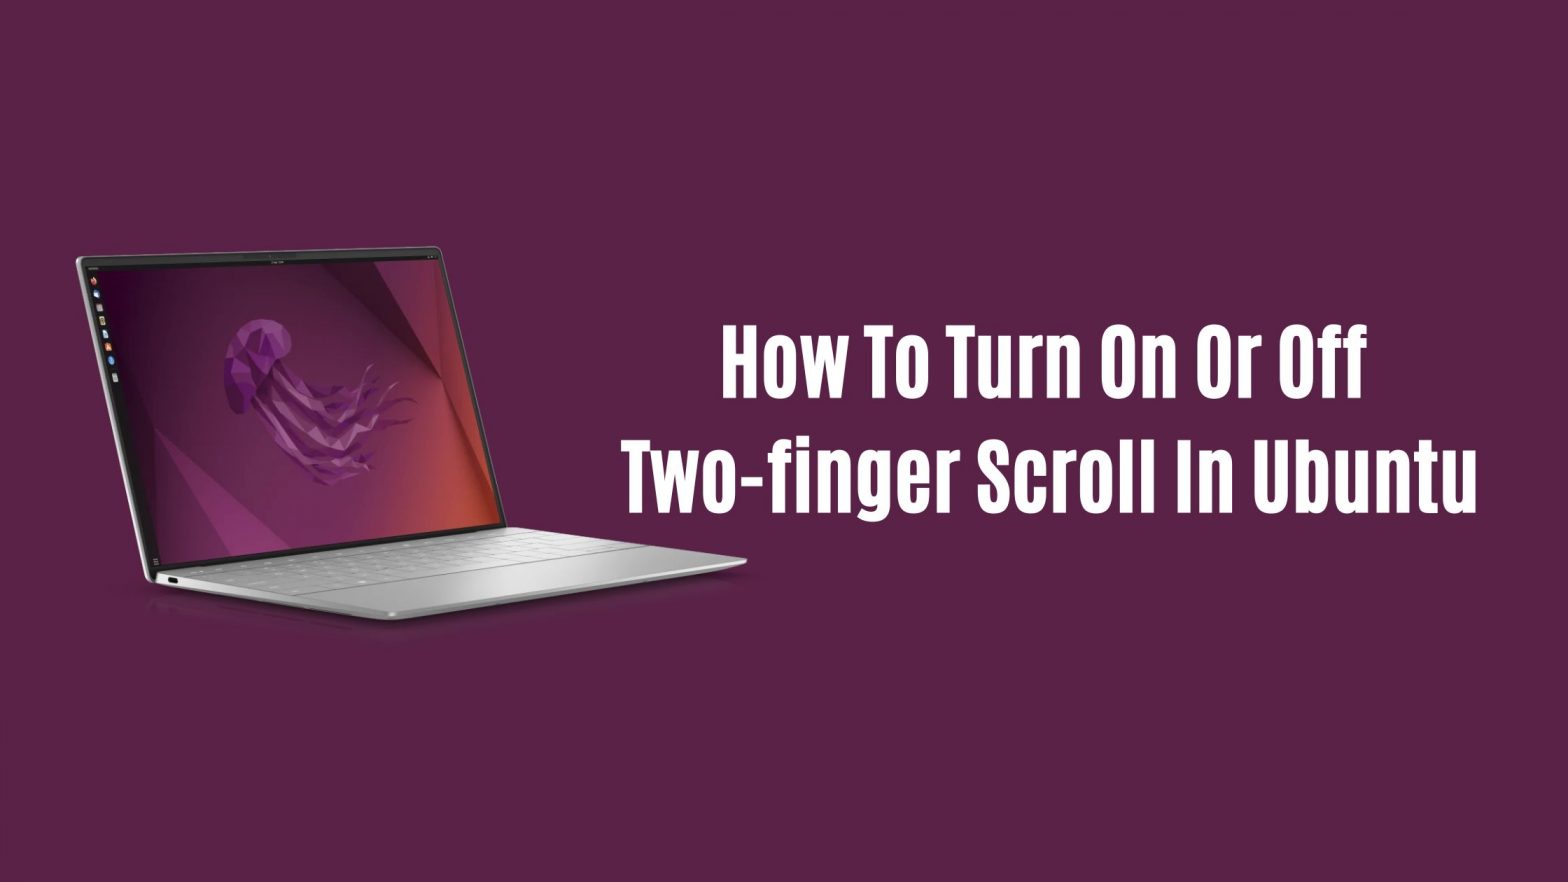 How To Turn On Or Off Two-finger Scroll In Ubuntu